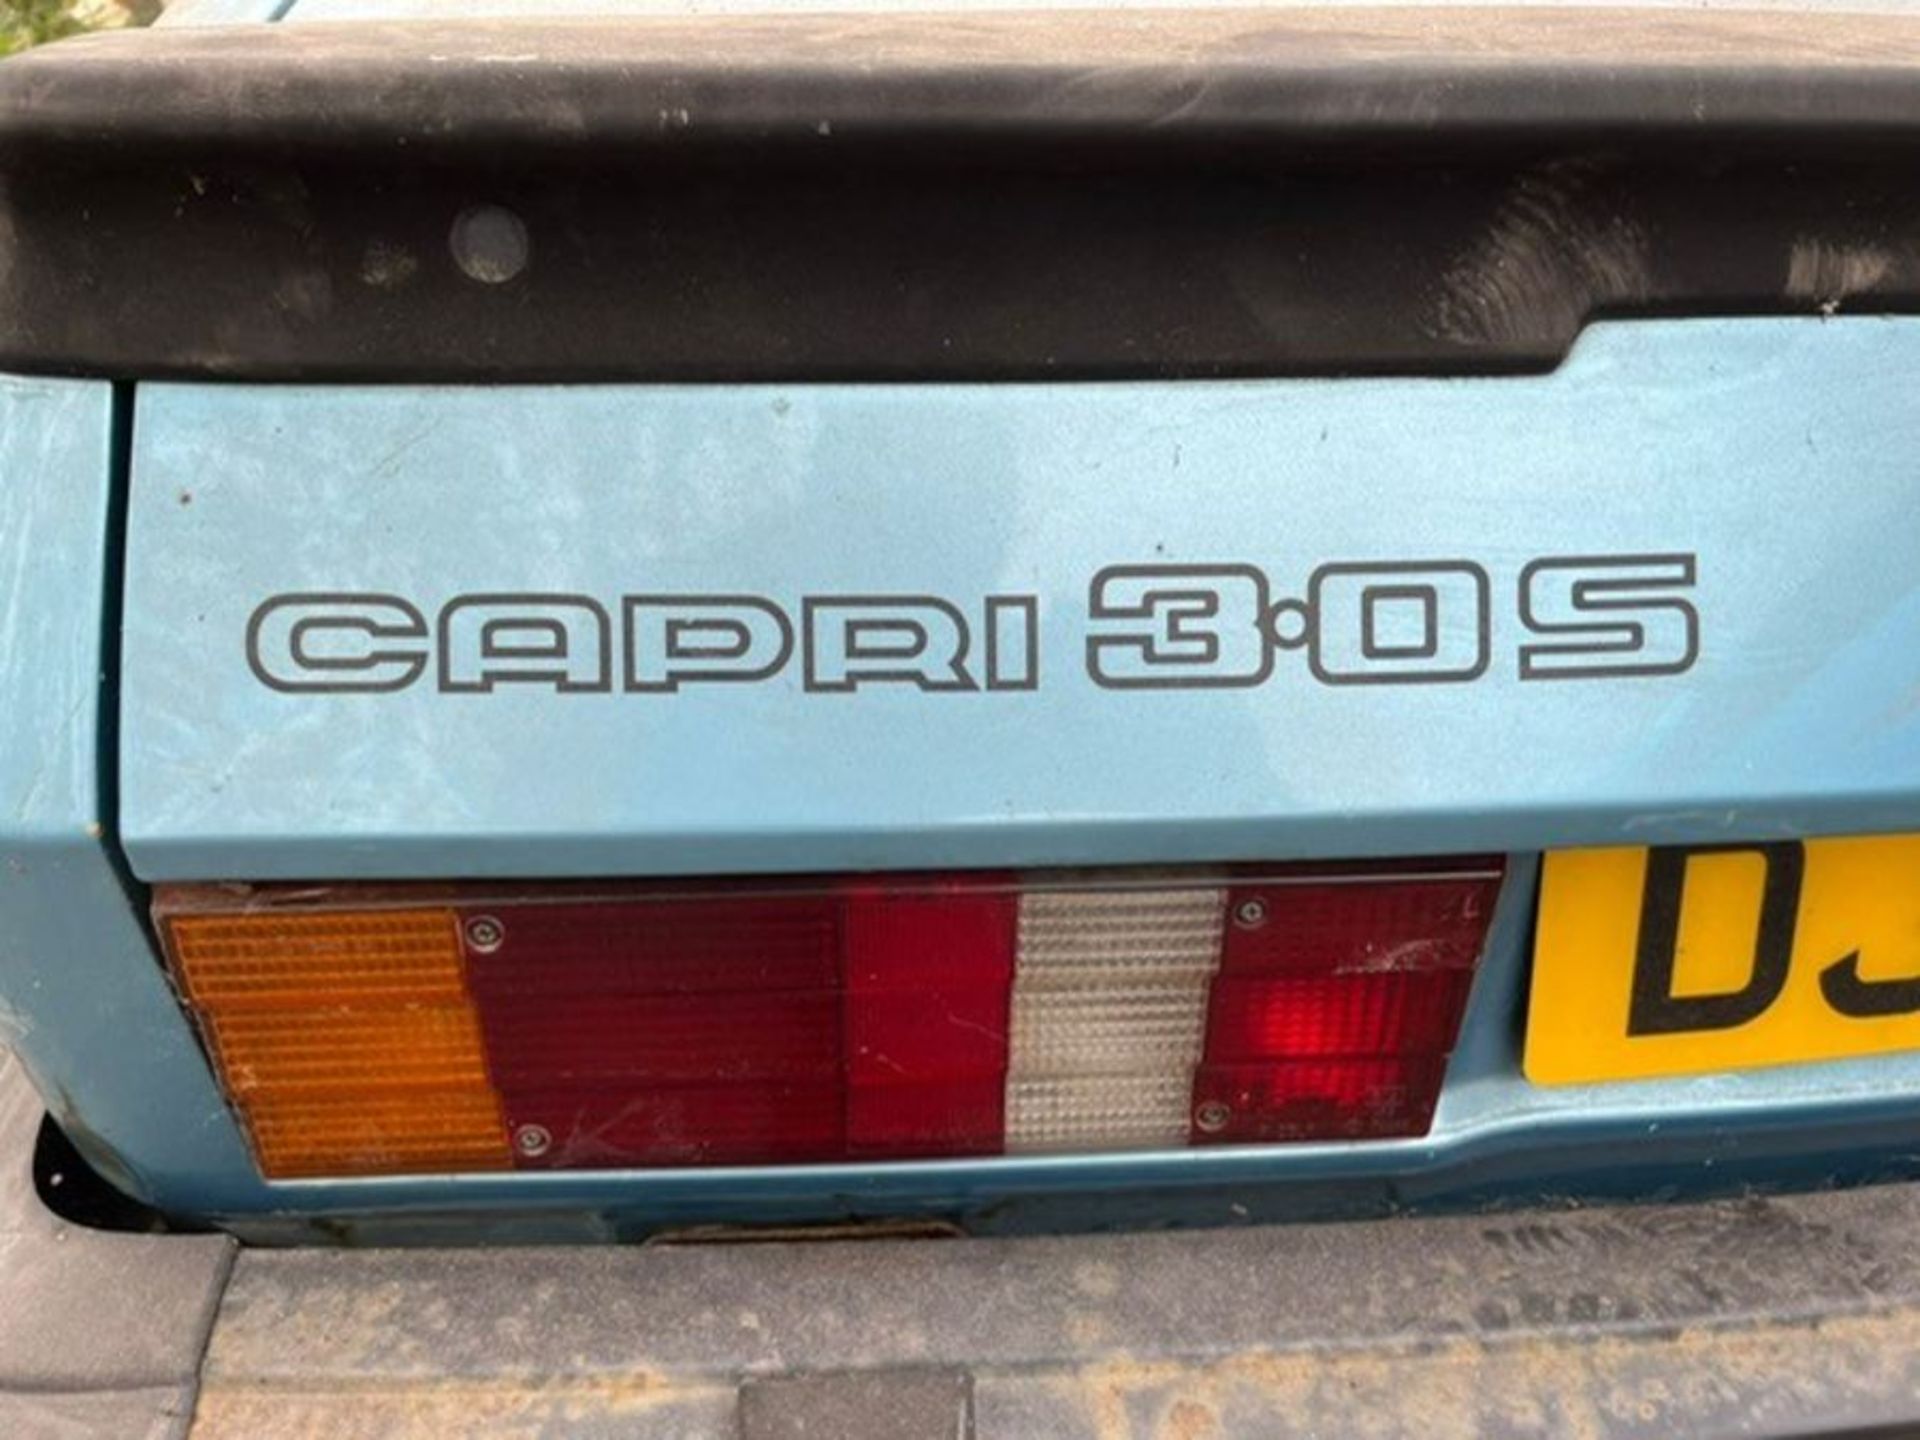 1979 Ford Capri 3.0s MkIII manual Although running and driving, this 4 speed manual 3.0s is - Image 26 of 168